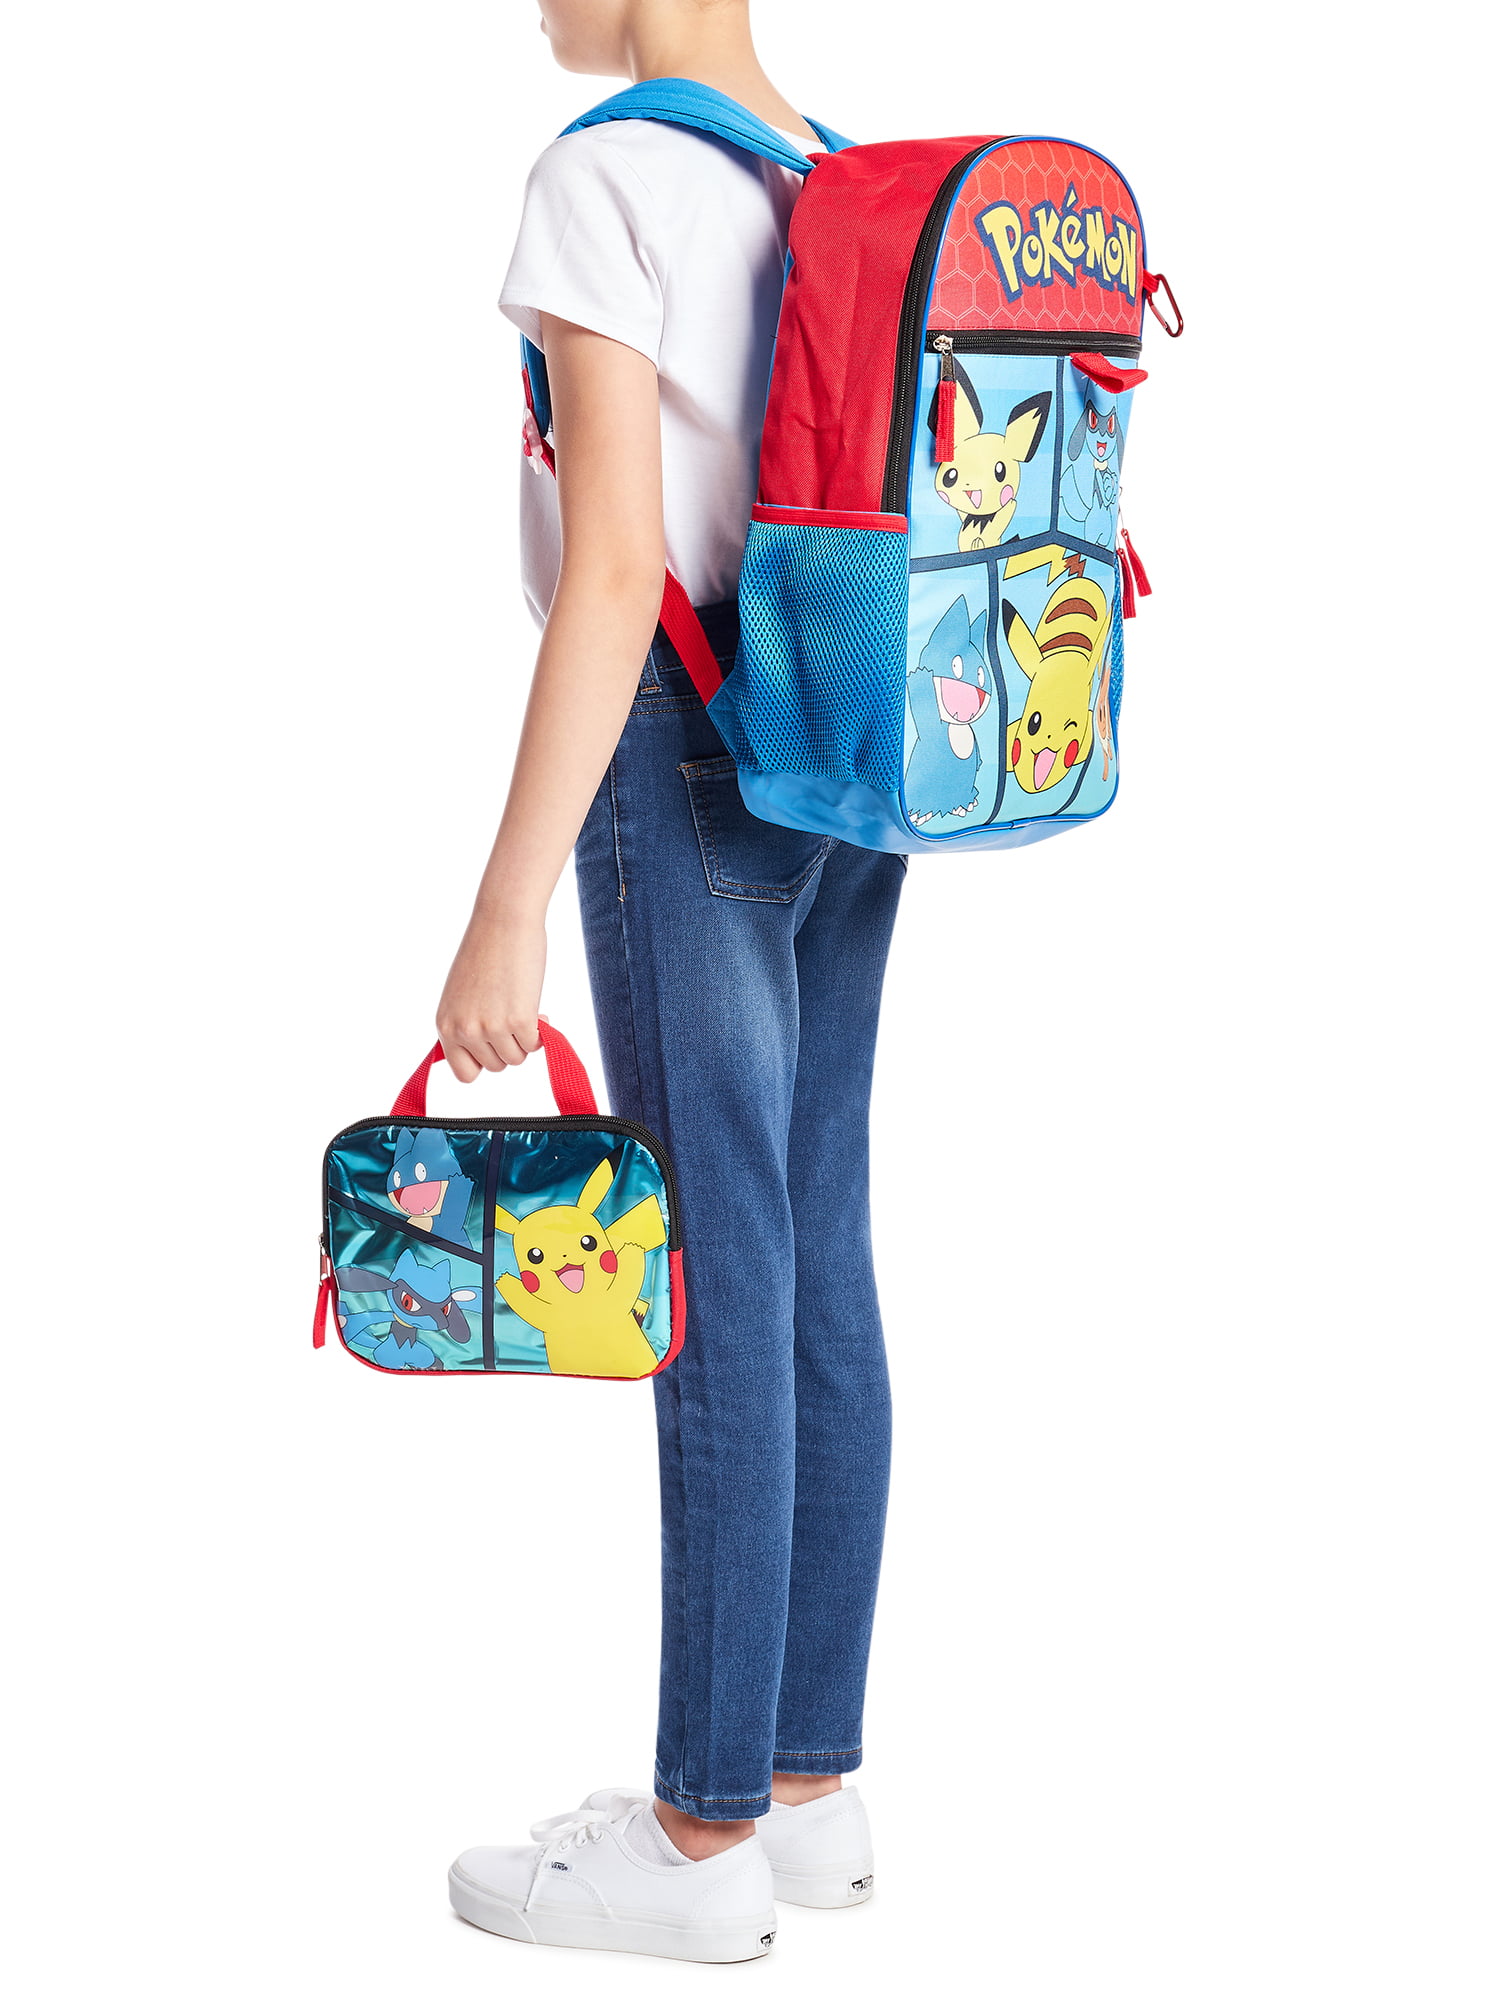 Pokemon 16 Laptop Backpack and Lunch Bag Set, 4-Piece, Multicolor 